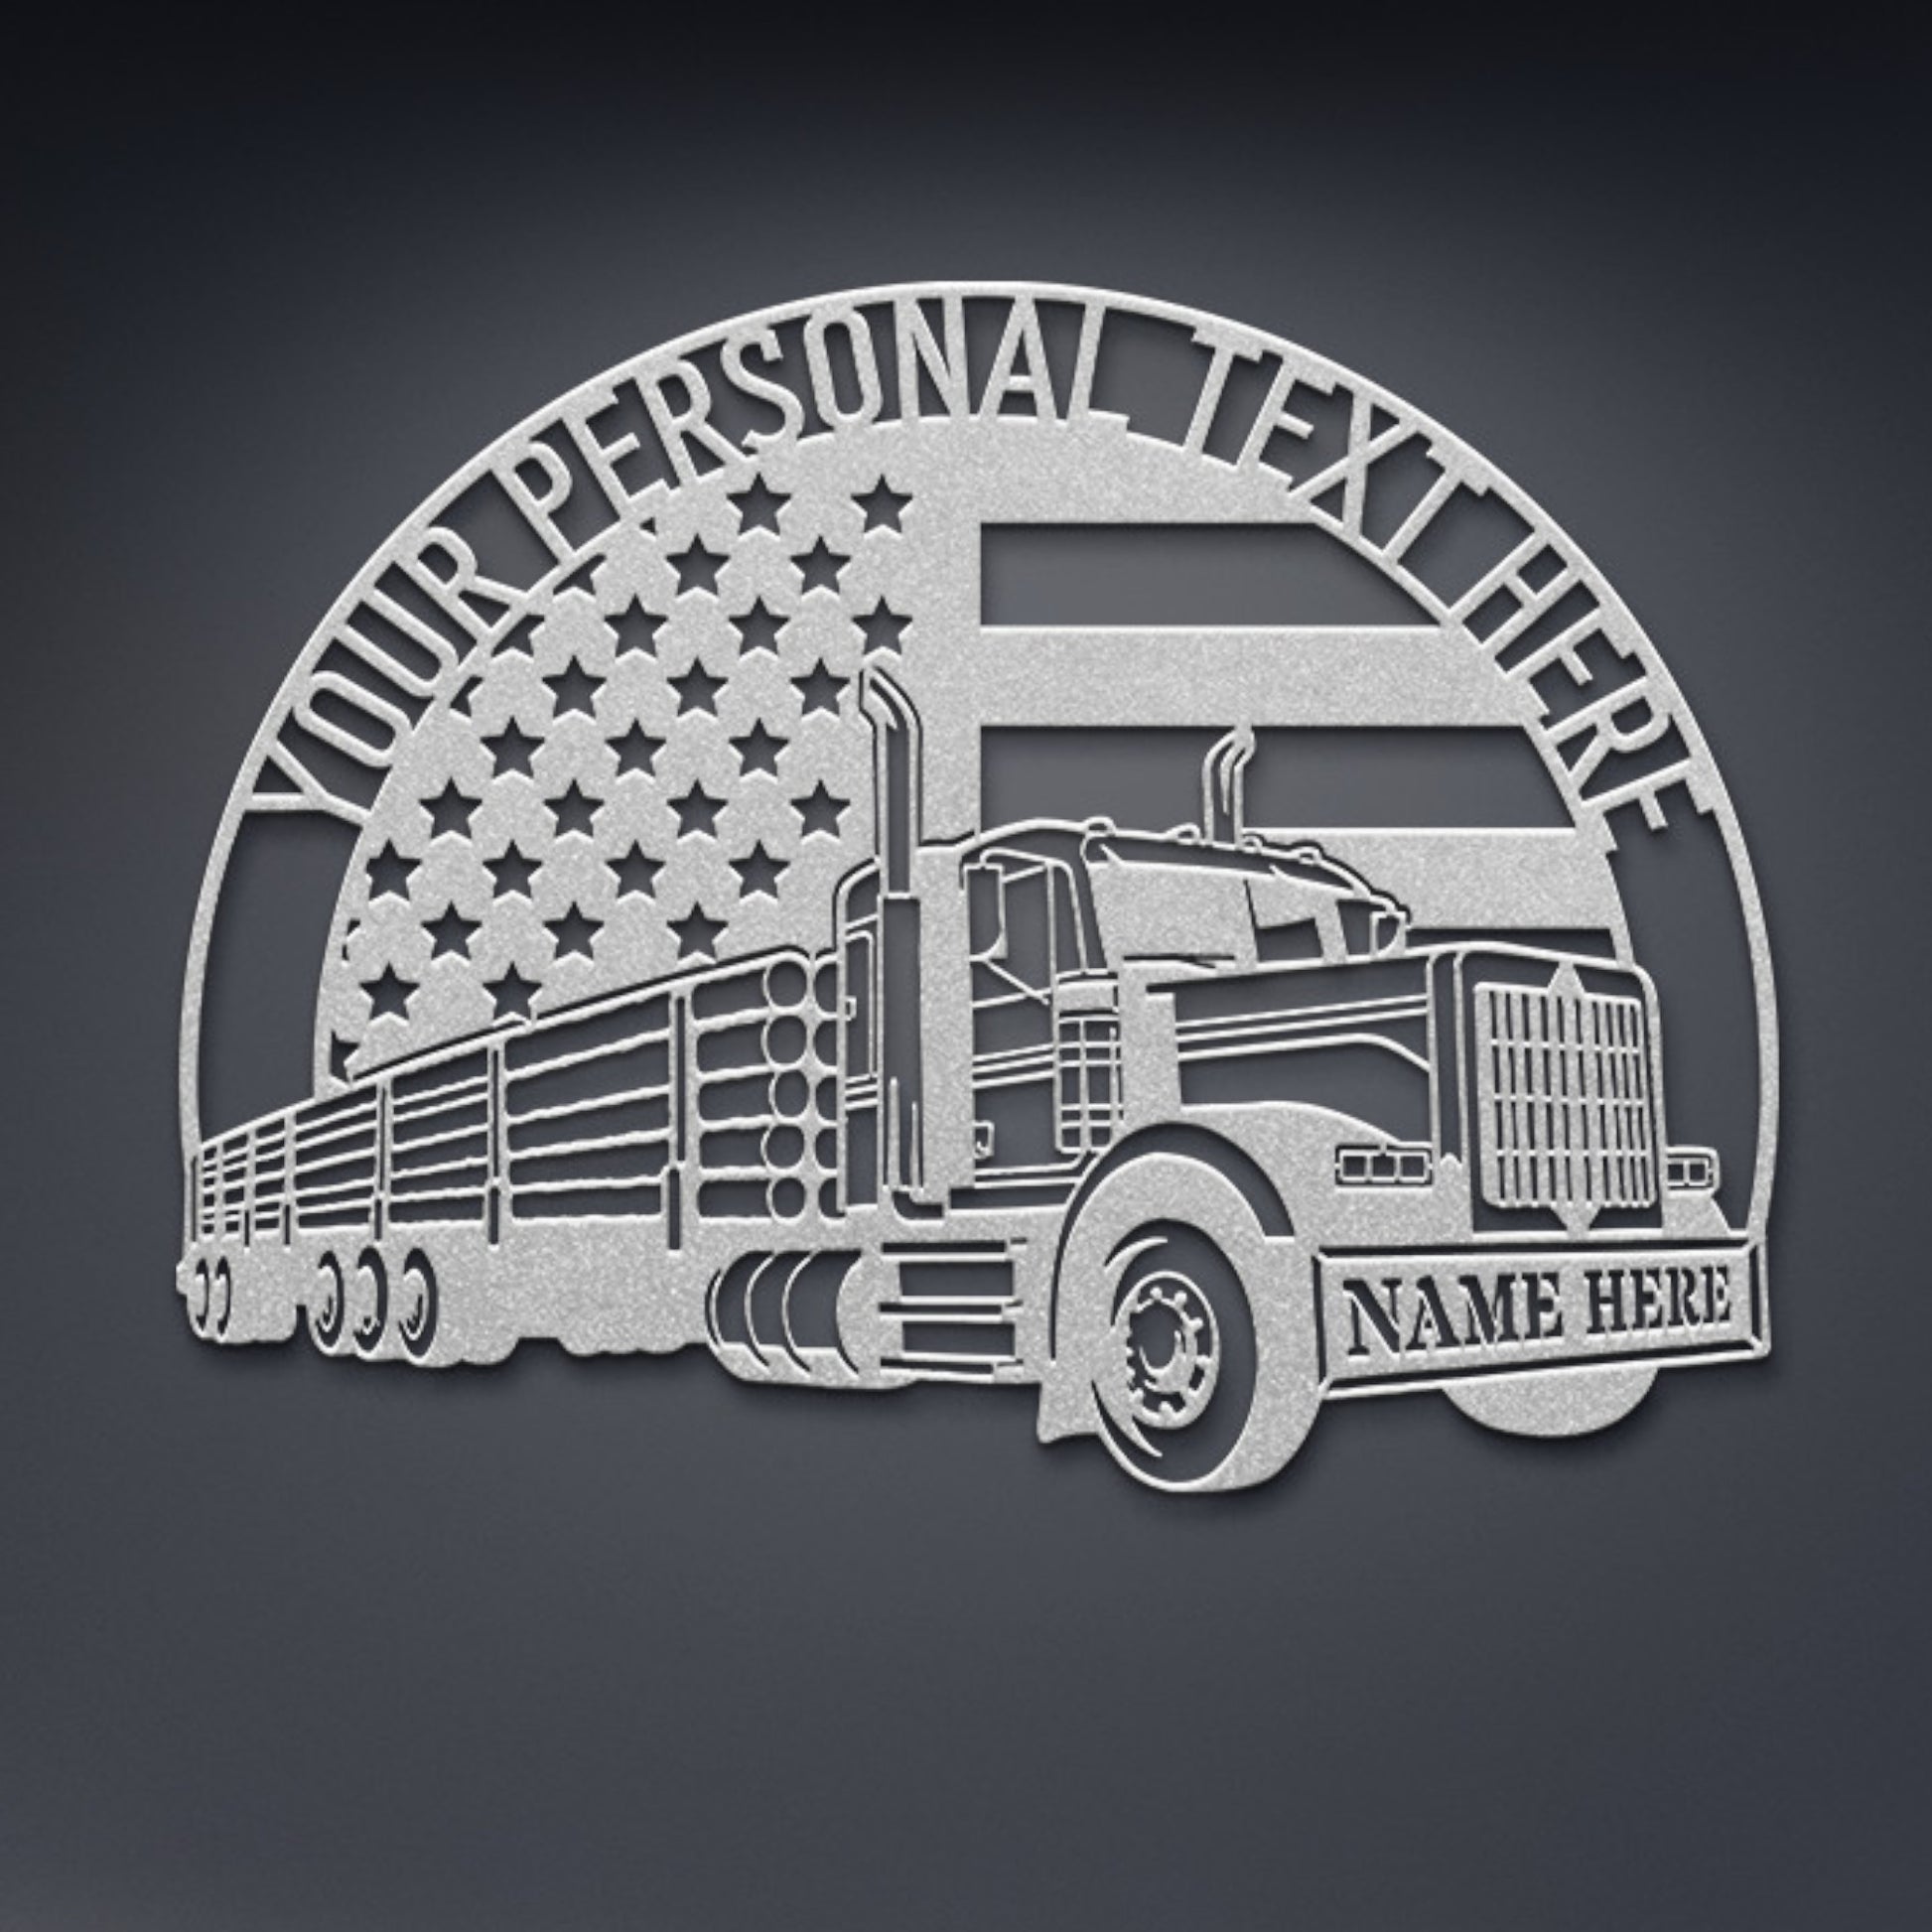 Personalized Logging Truck Name Metal Sign. Custom Timber Lorry Wall Decor. Patriotic Woodworker Gift. American Logger. Truck Driver Decor